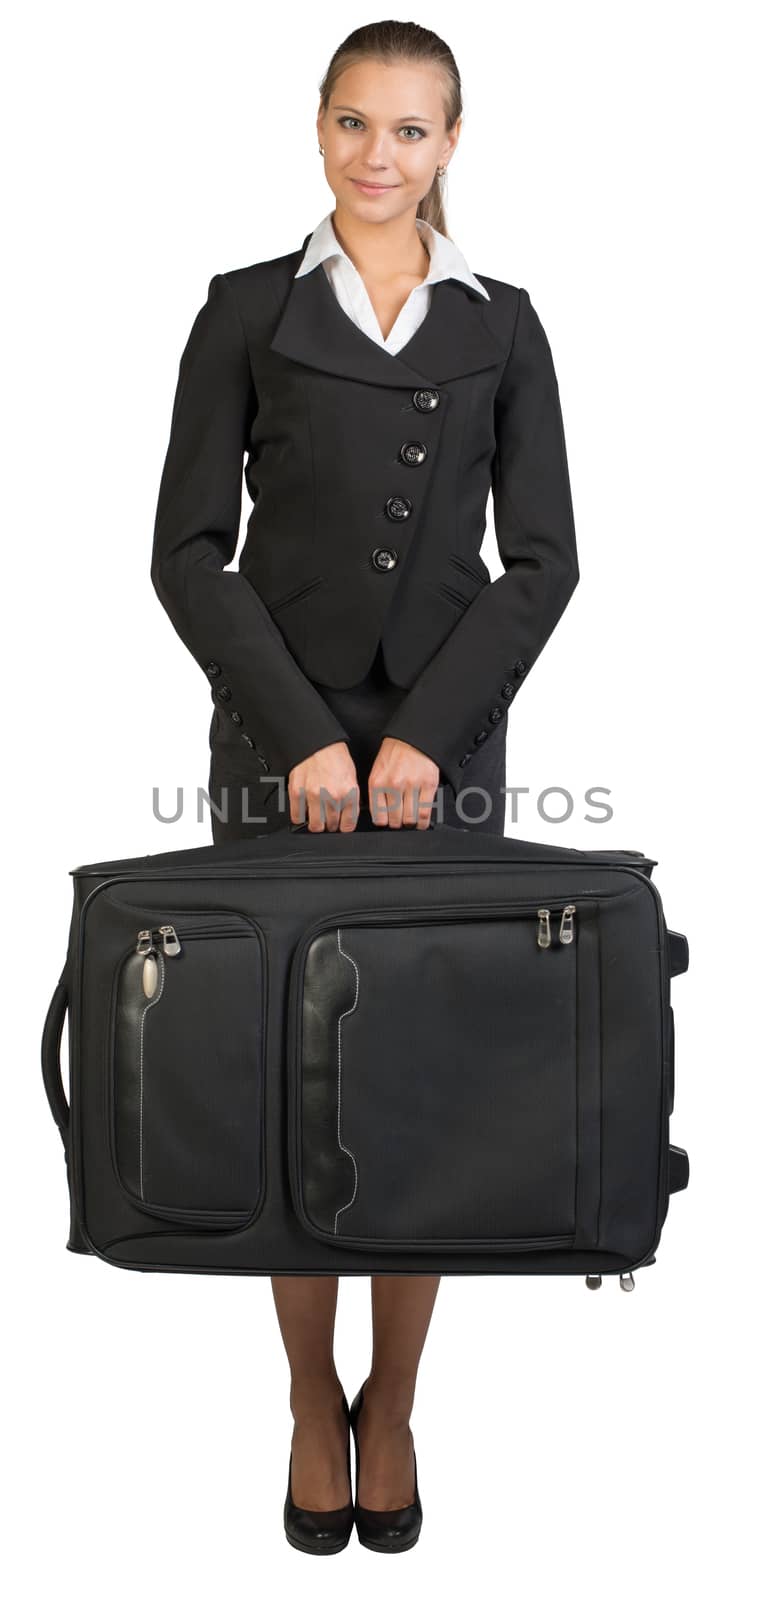 Businesswoman holding suitcase, looking at camera, smiling. Isolated over white background